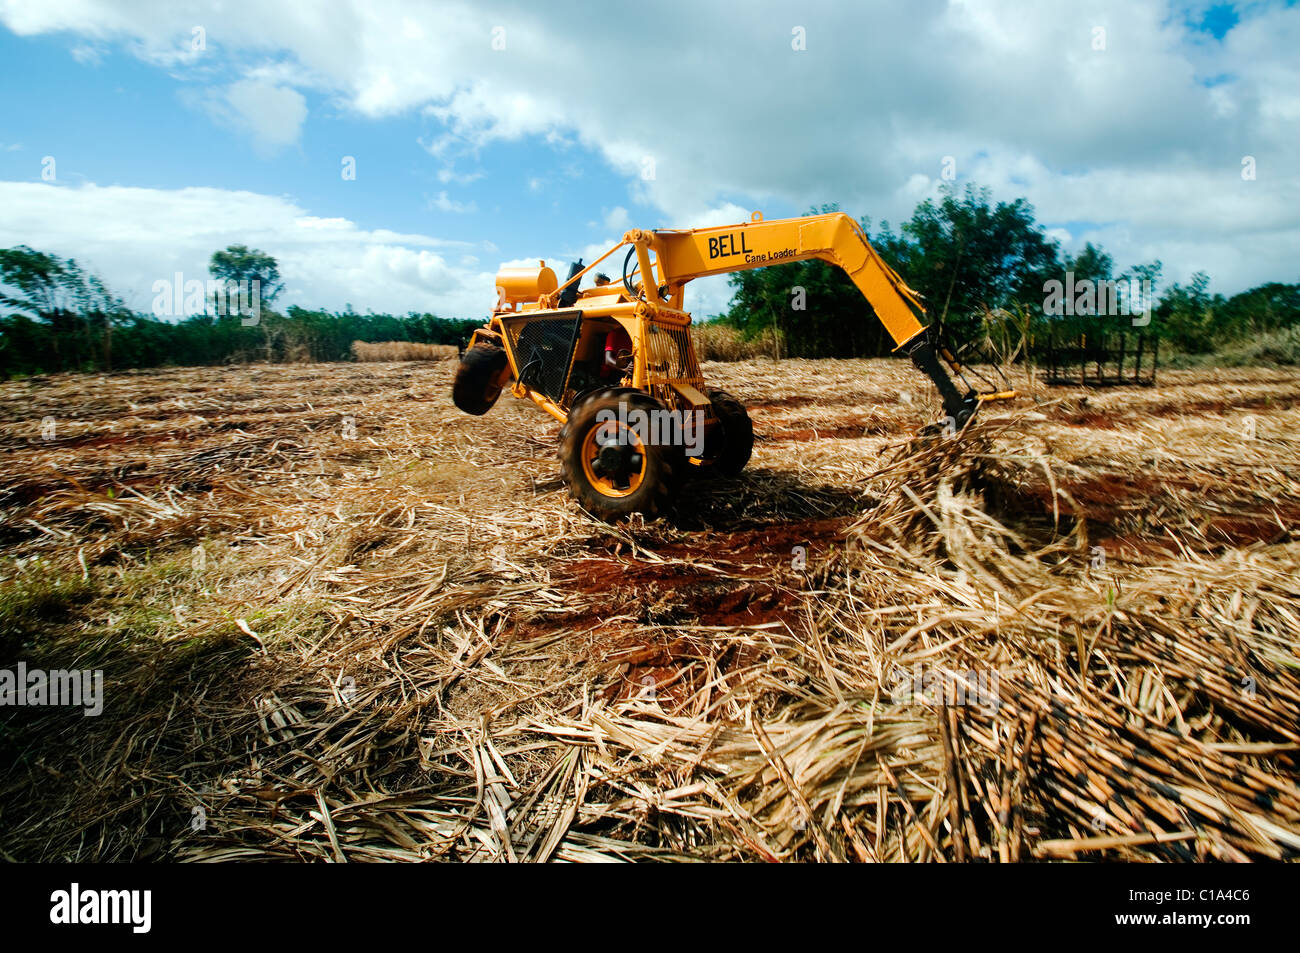 Sugarcane collection using specialised Bell Cane Loader, Near Balaclava, Mauritius Stock Photo